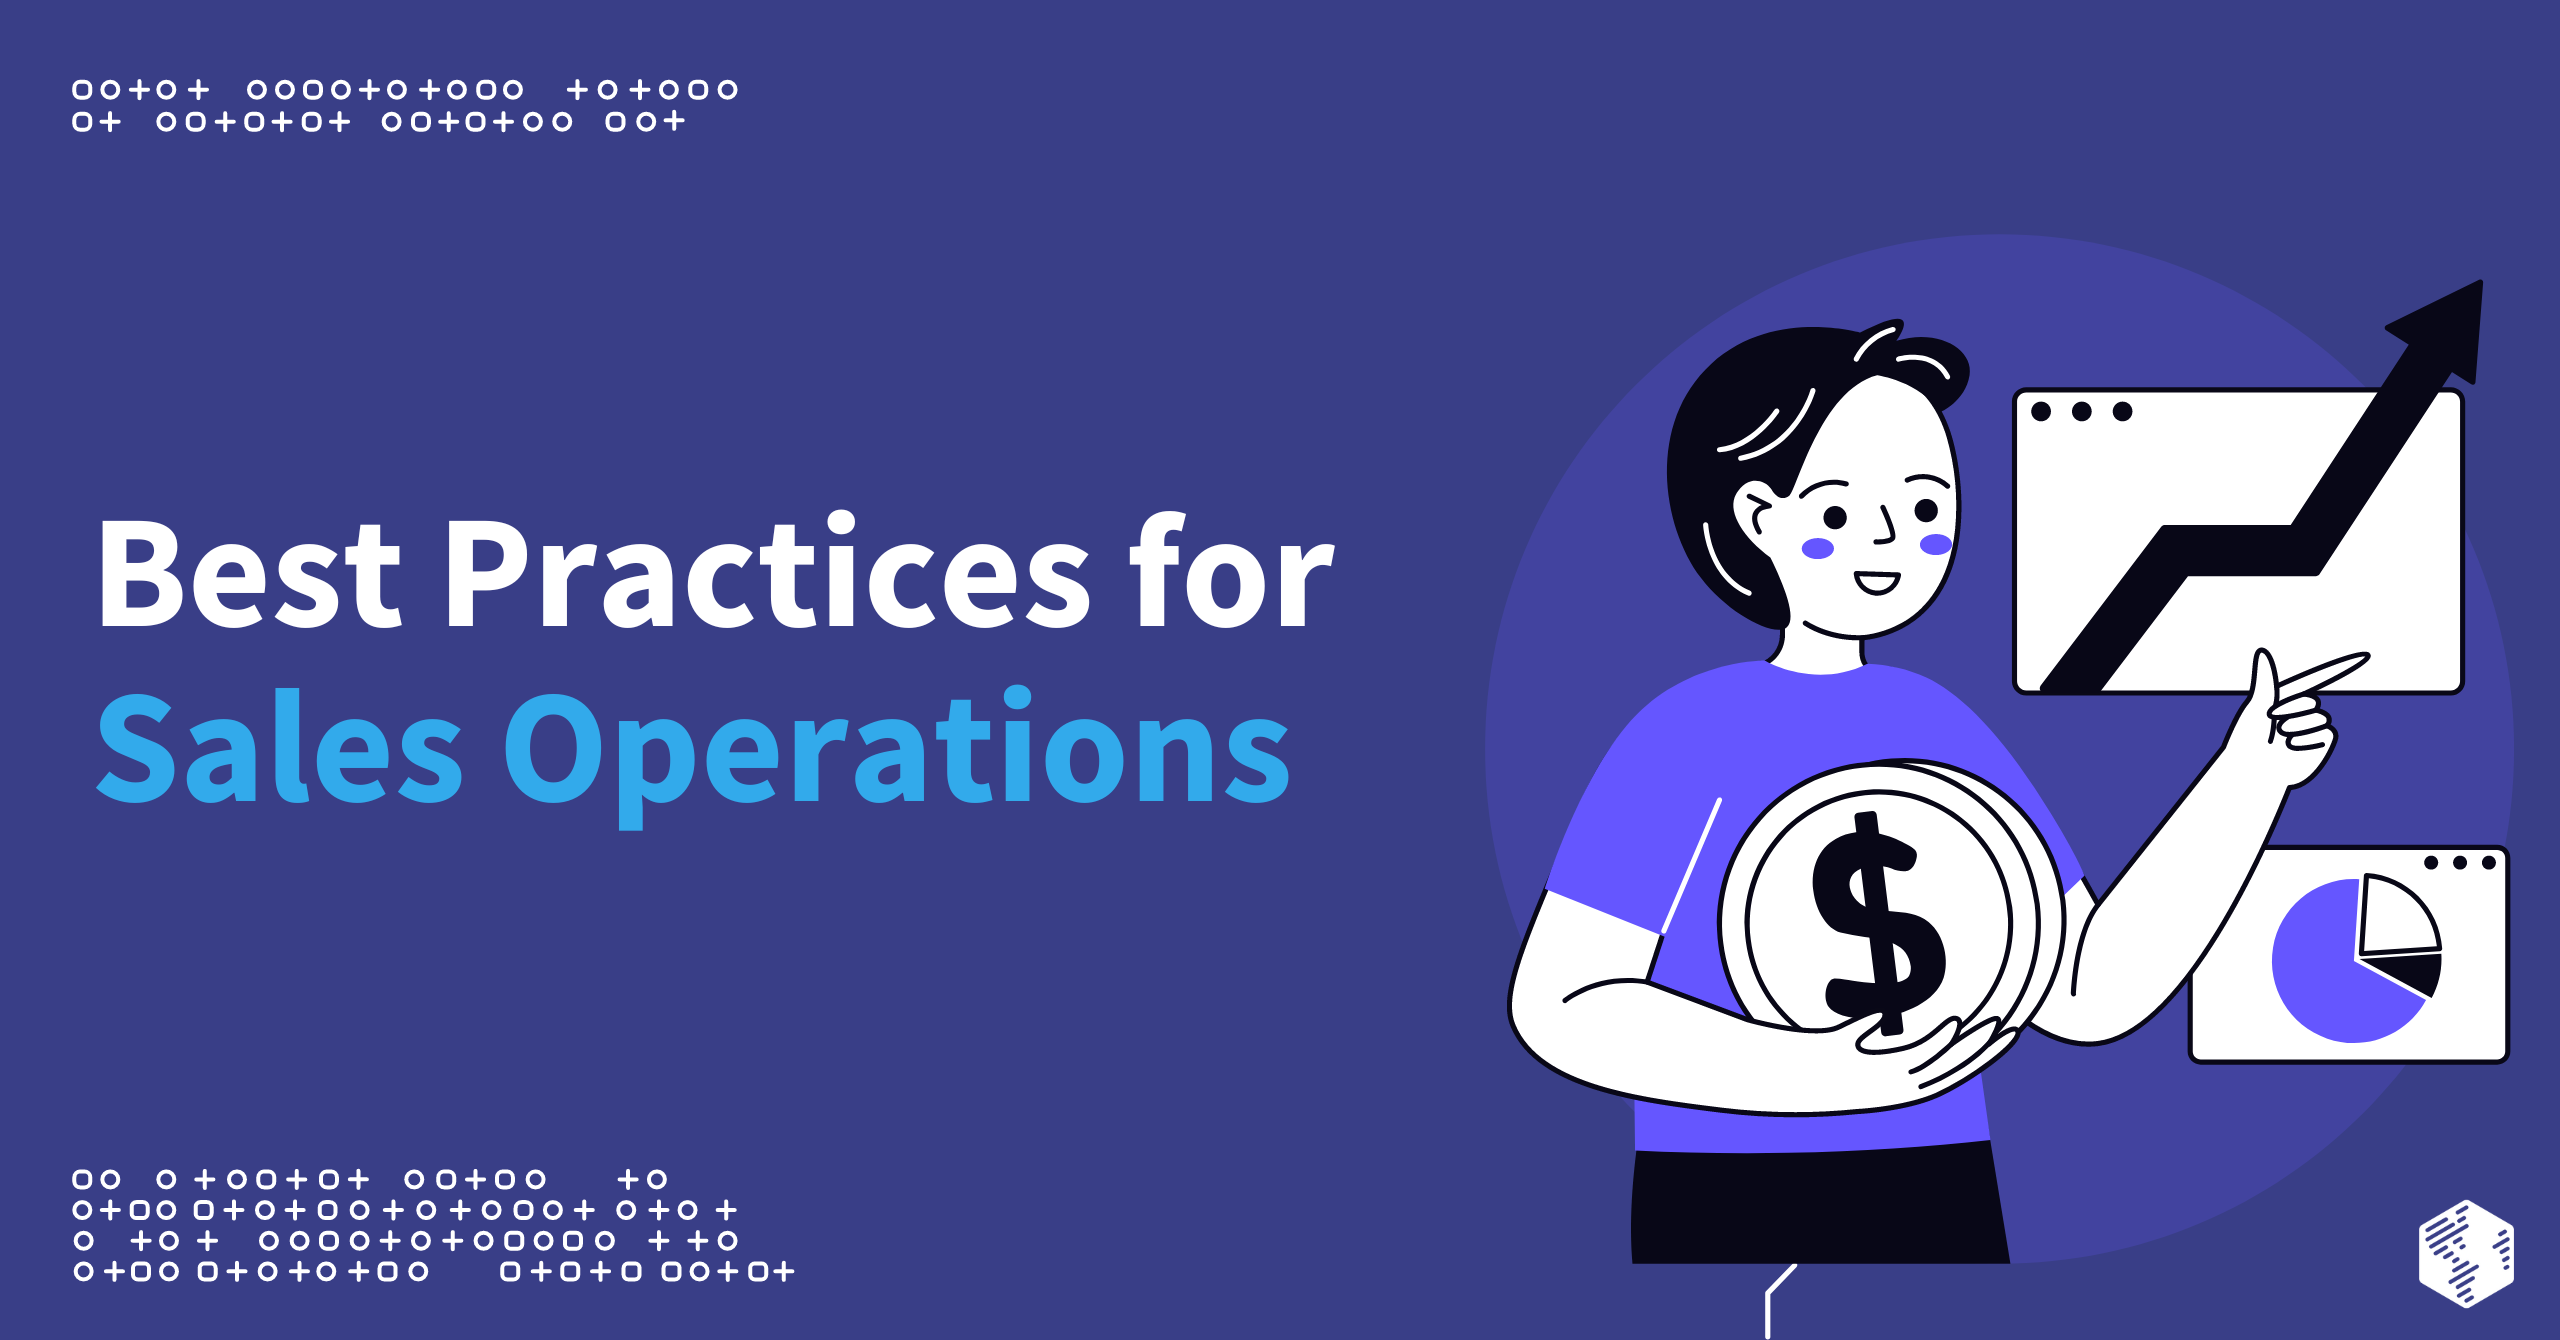 Best Practices for Sales Operations